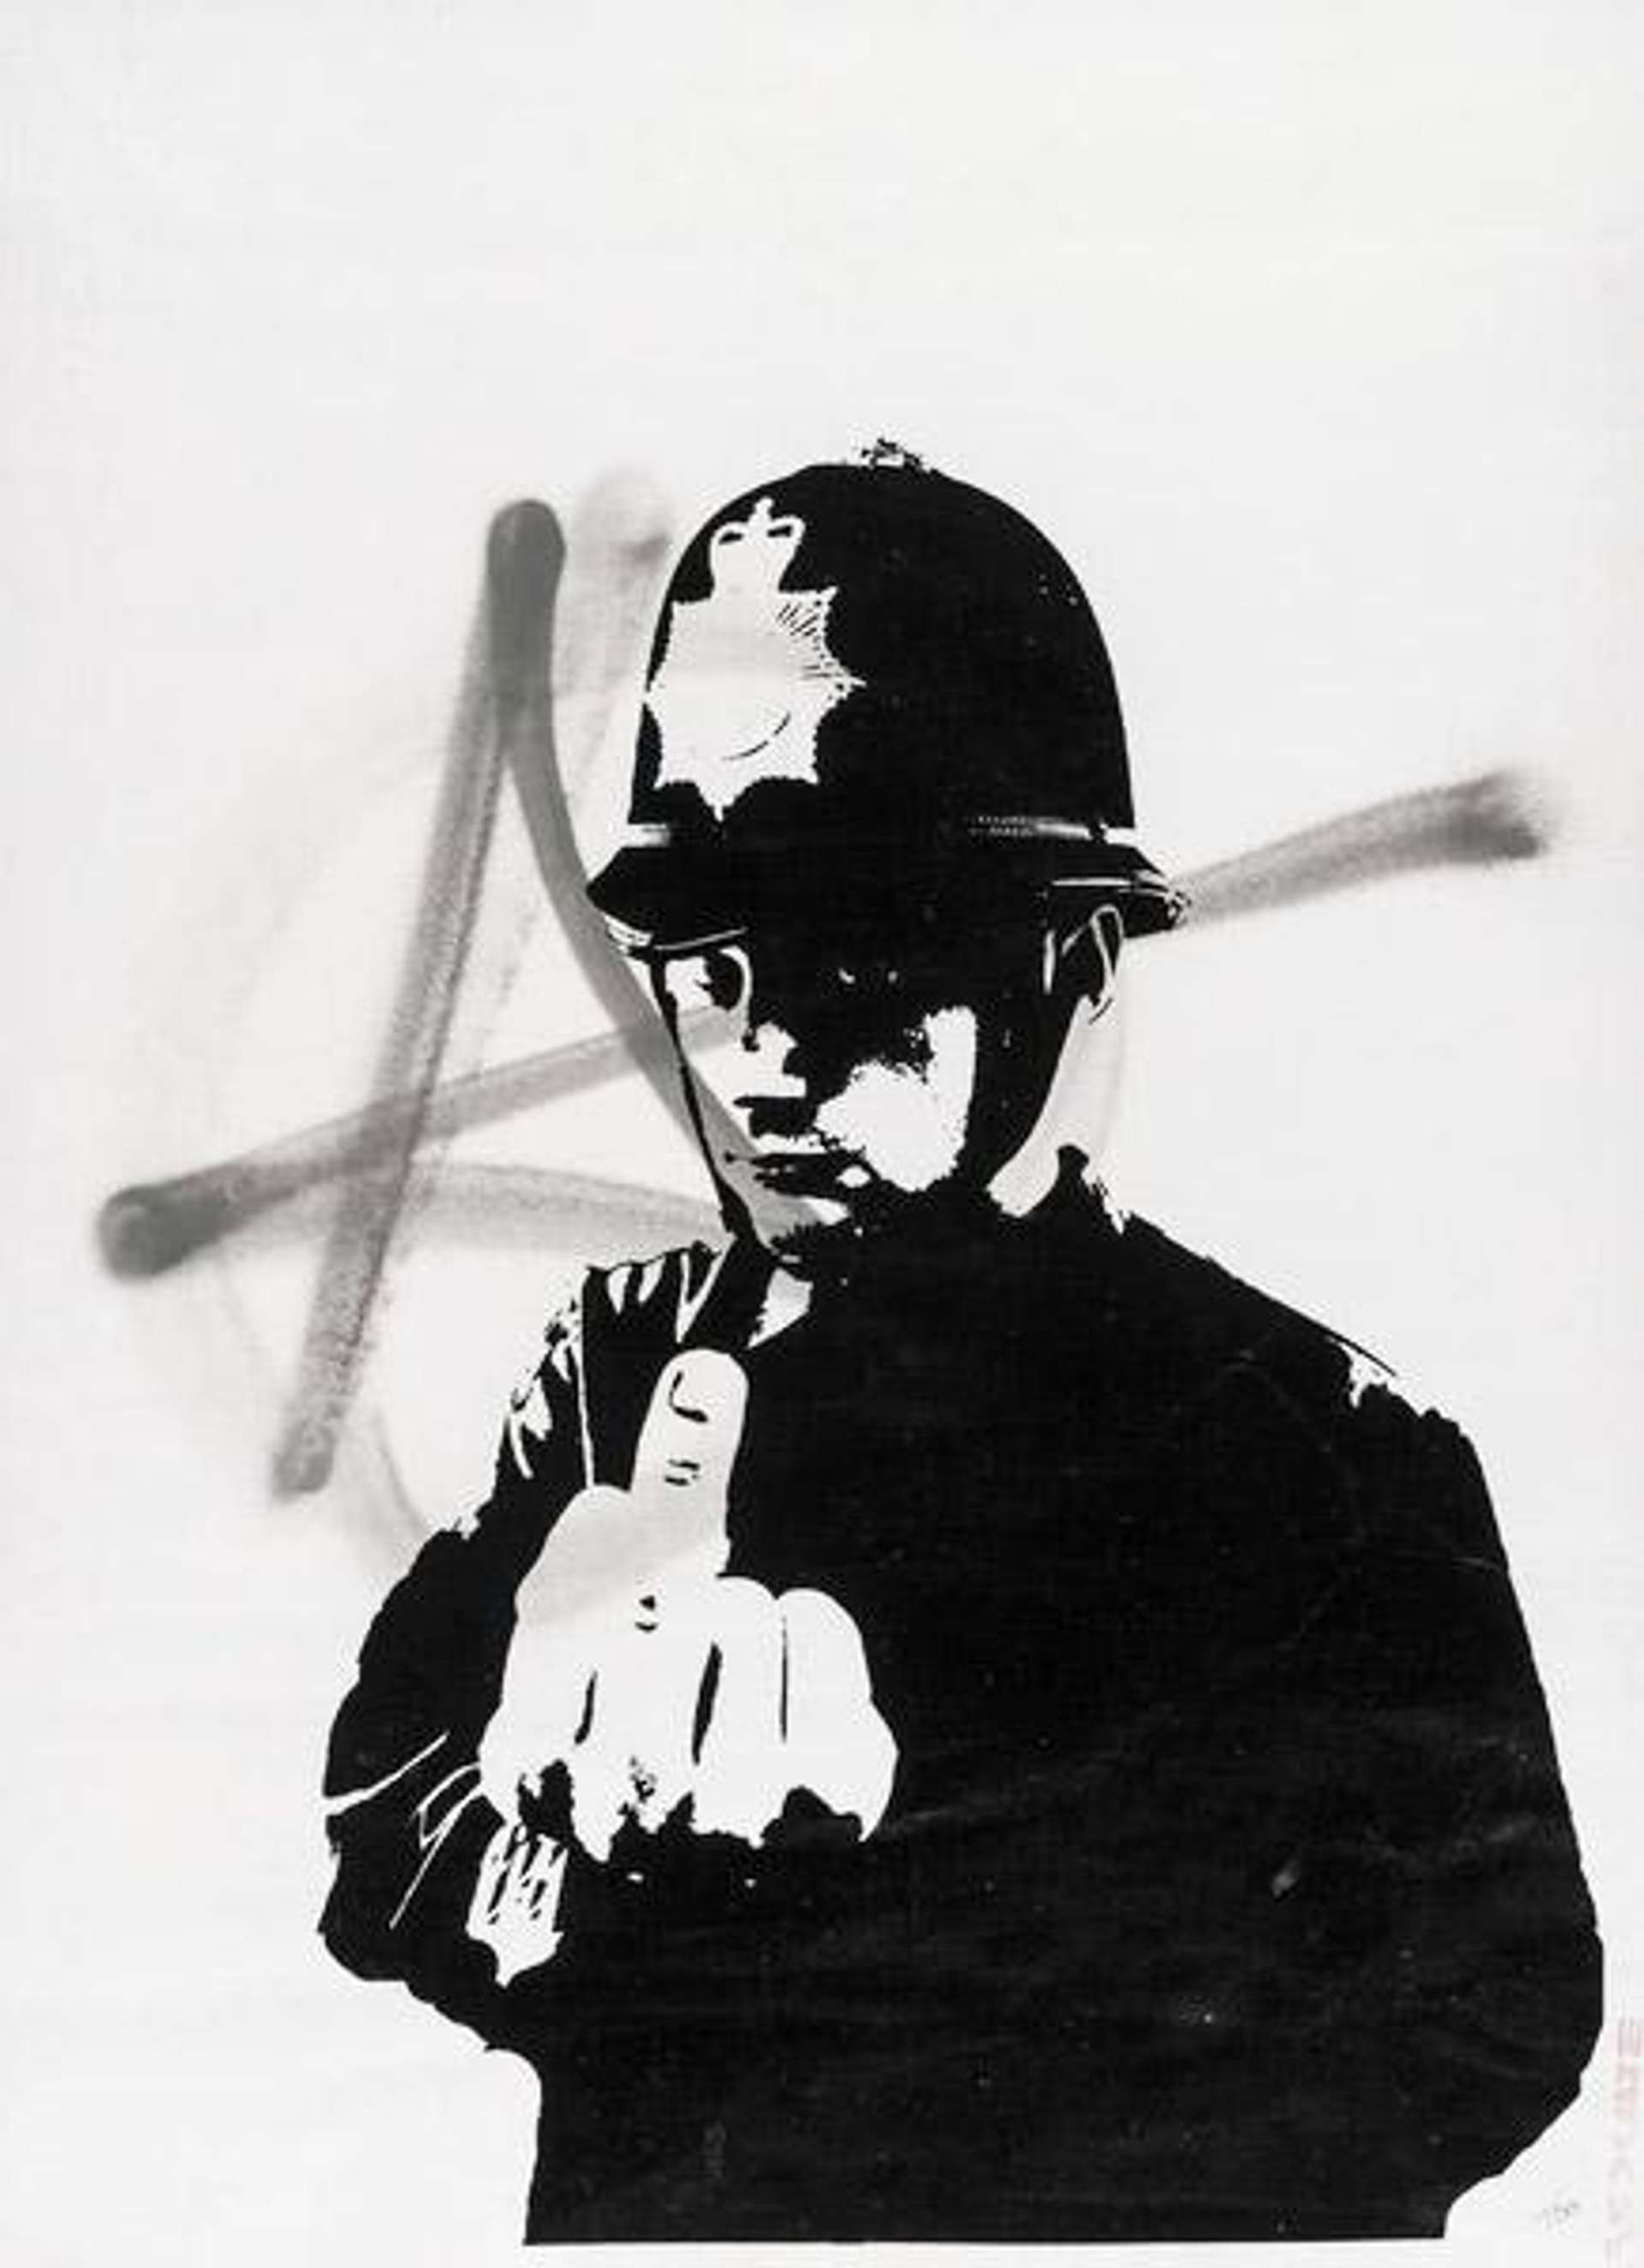 Banksy: Rude Copper (Anarchy) - Signed Mixed Media